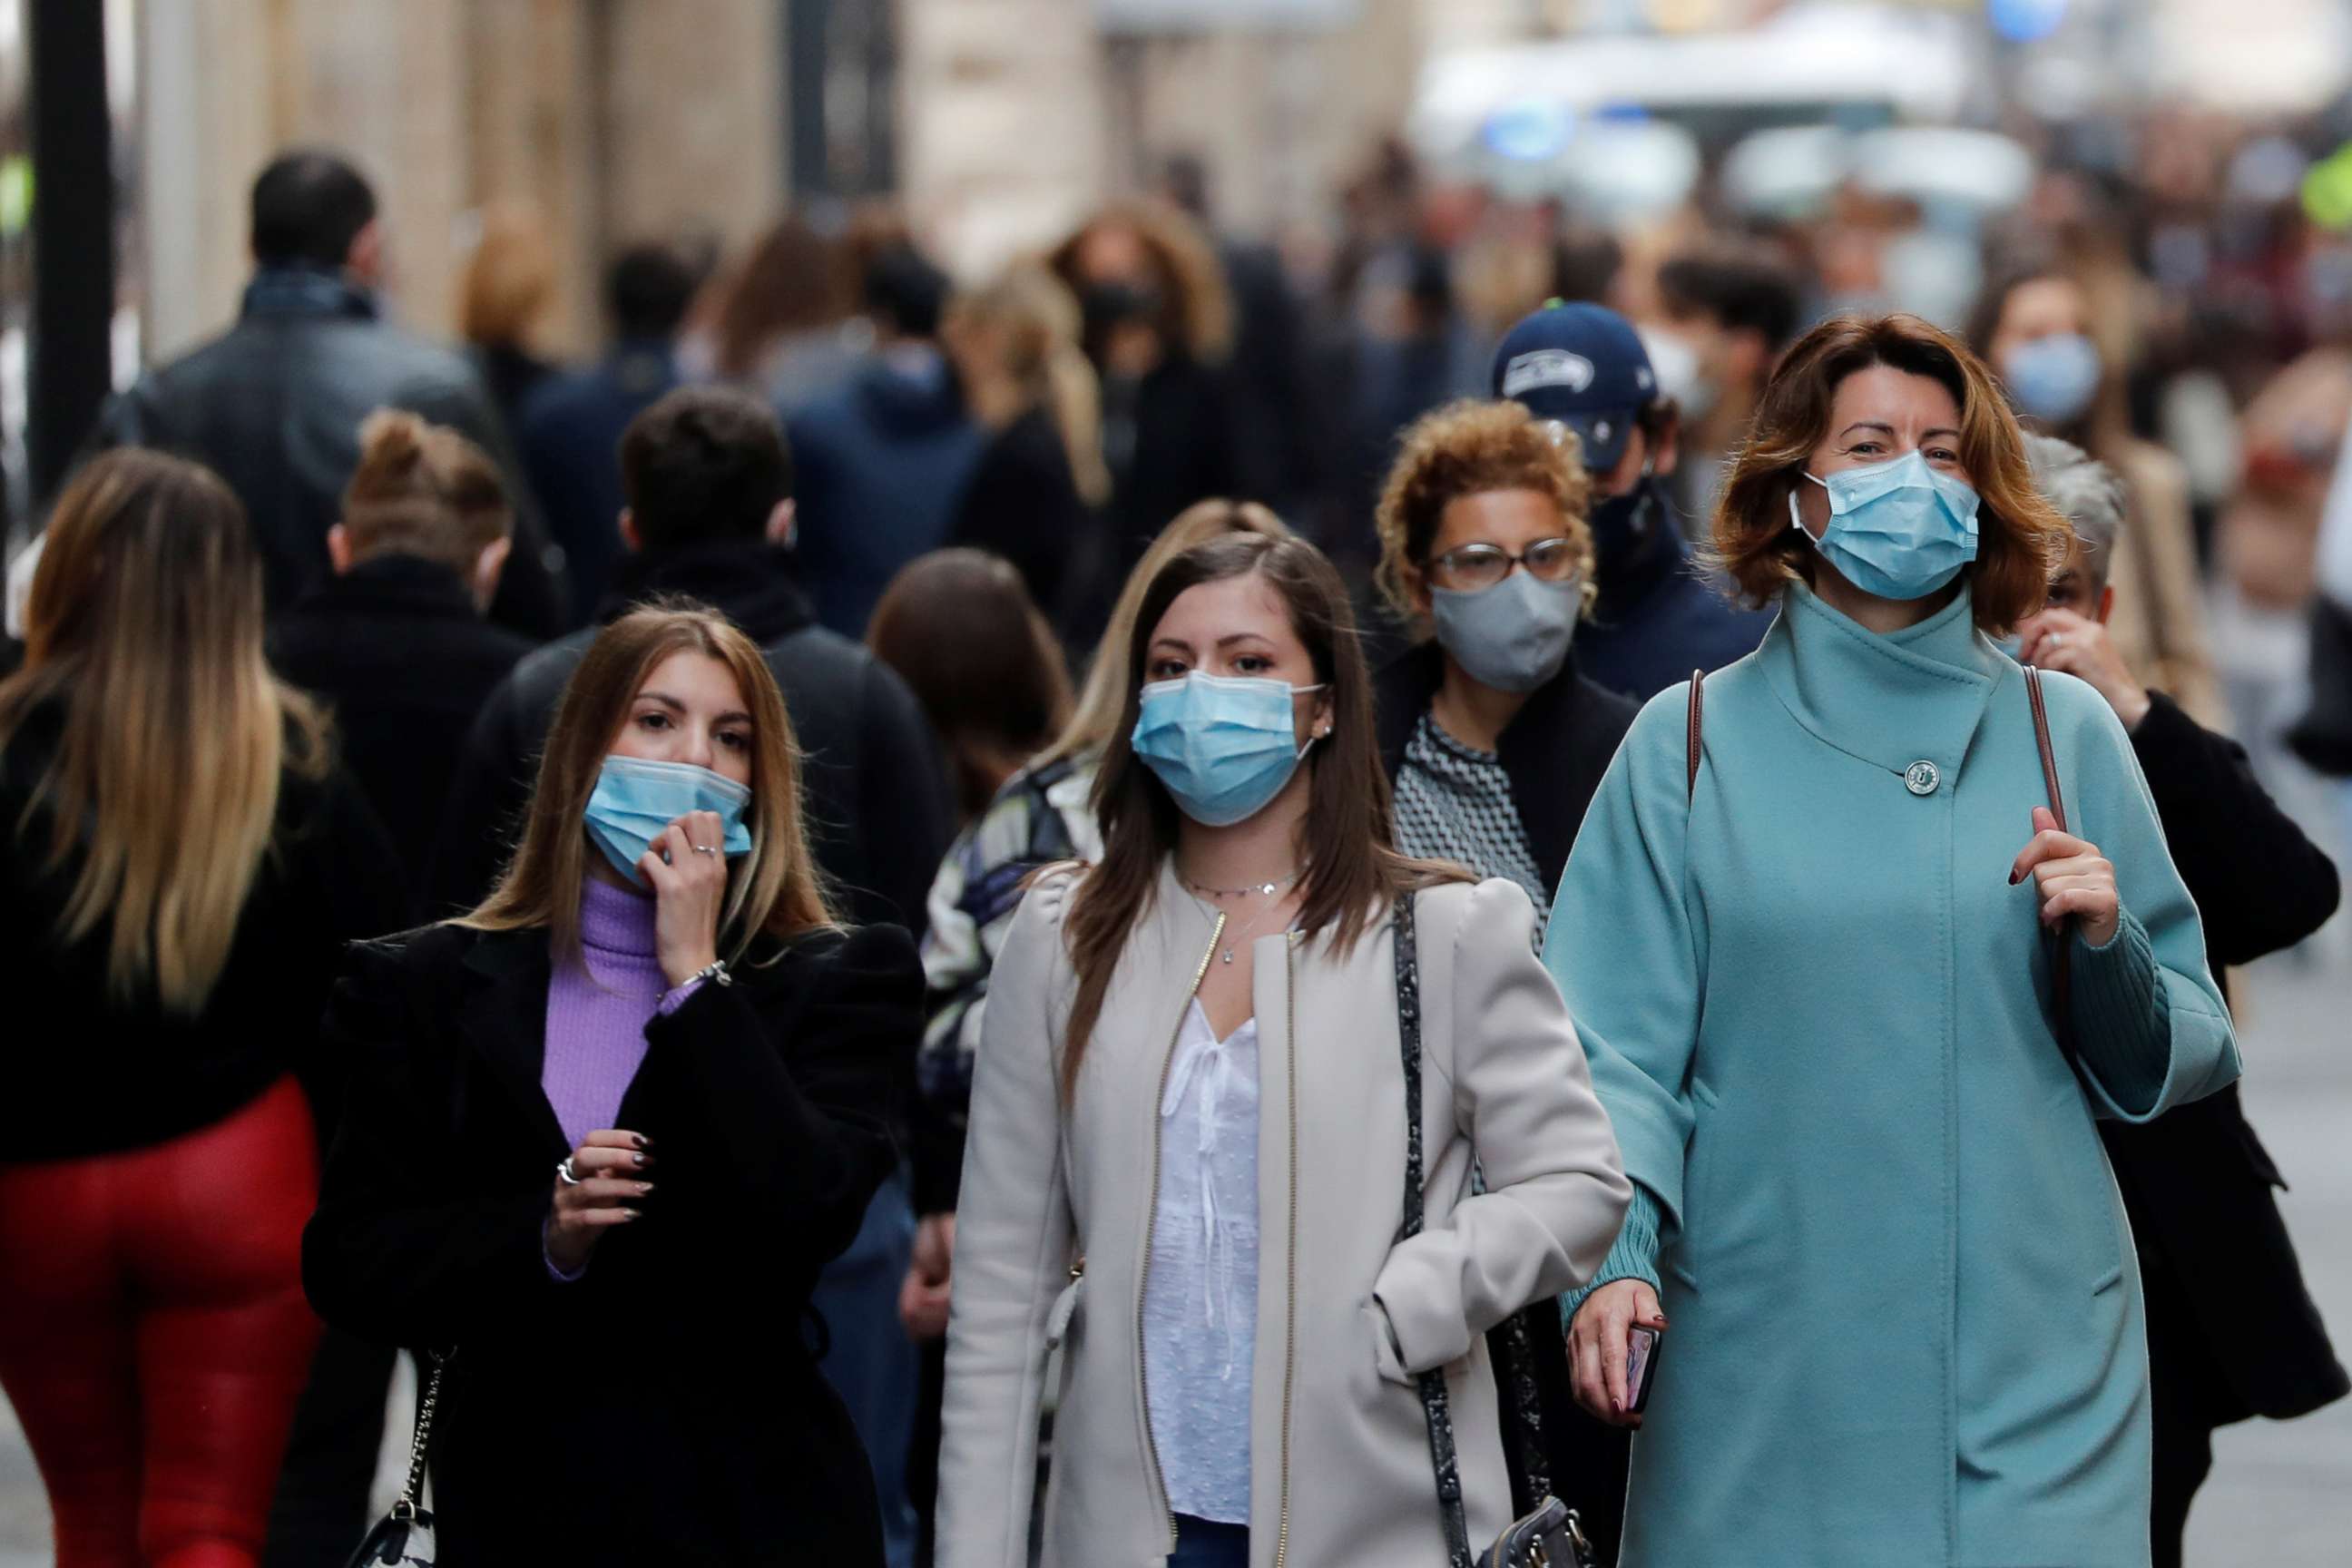 PHOTO: People wearing protective masks walk along the principal shopping street of Via del Corso, as the number of people infected by COVID-19 continues to rise, in Rome, Nov. 14, 2020.